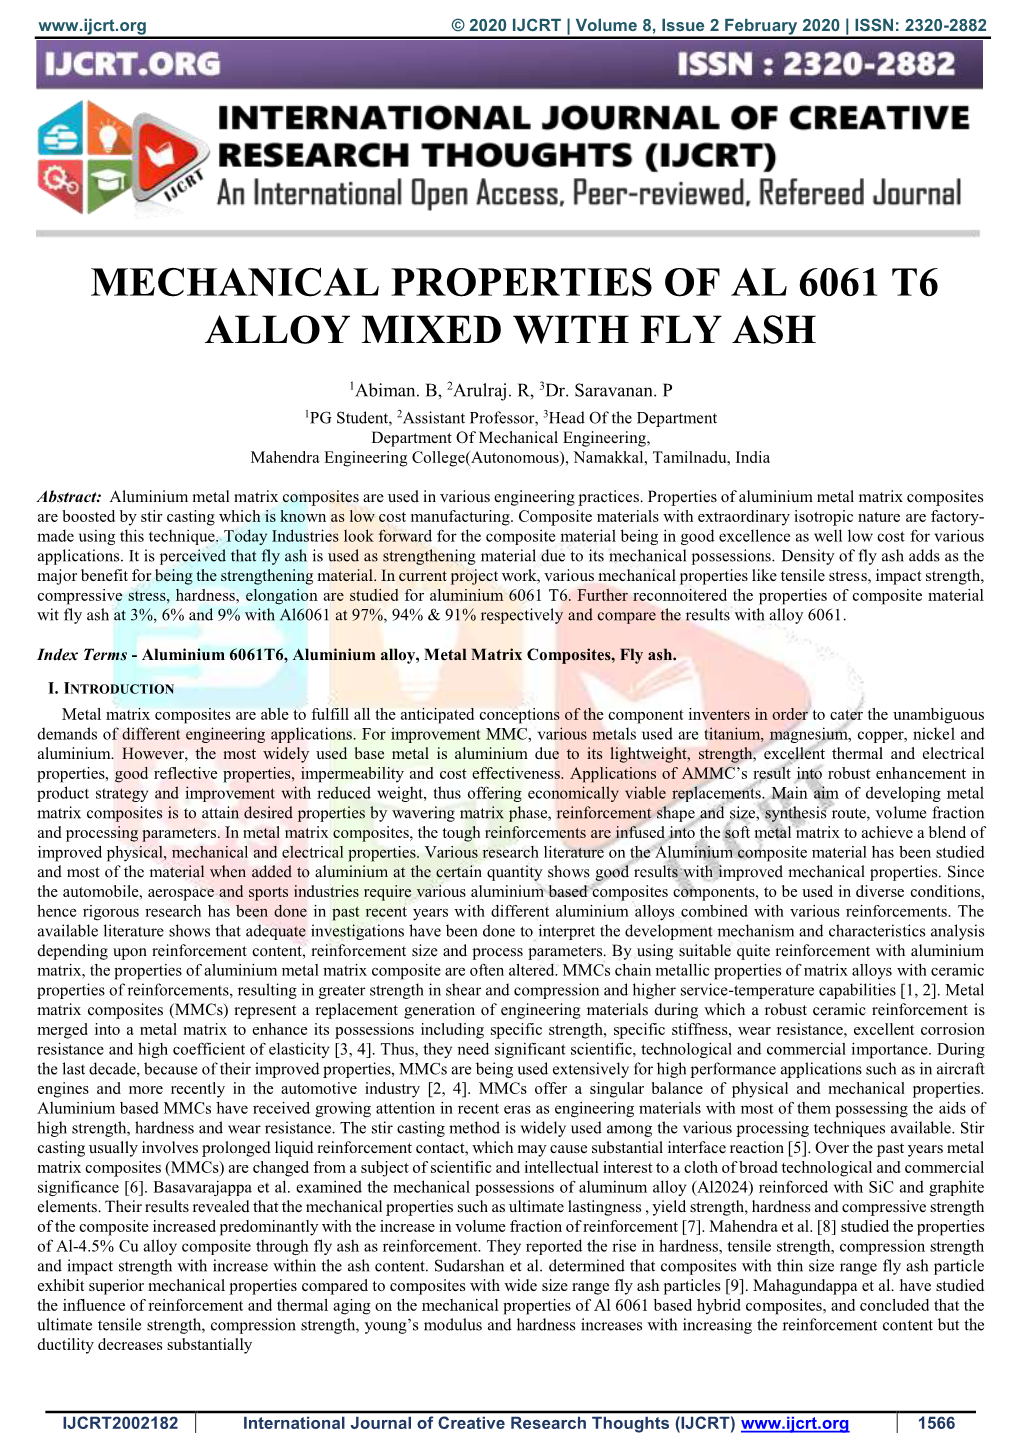 Mechanical Properties of Al 6061 T6 Alloy Mixed with Fly Ash